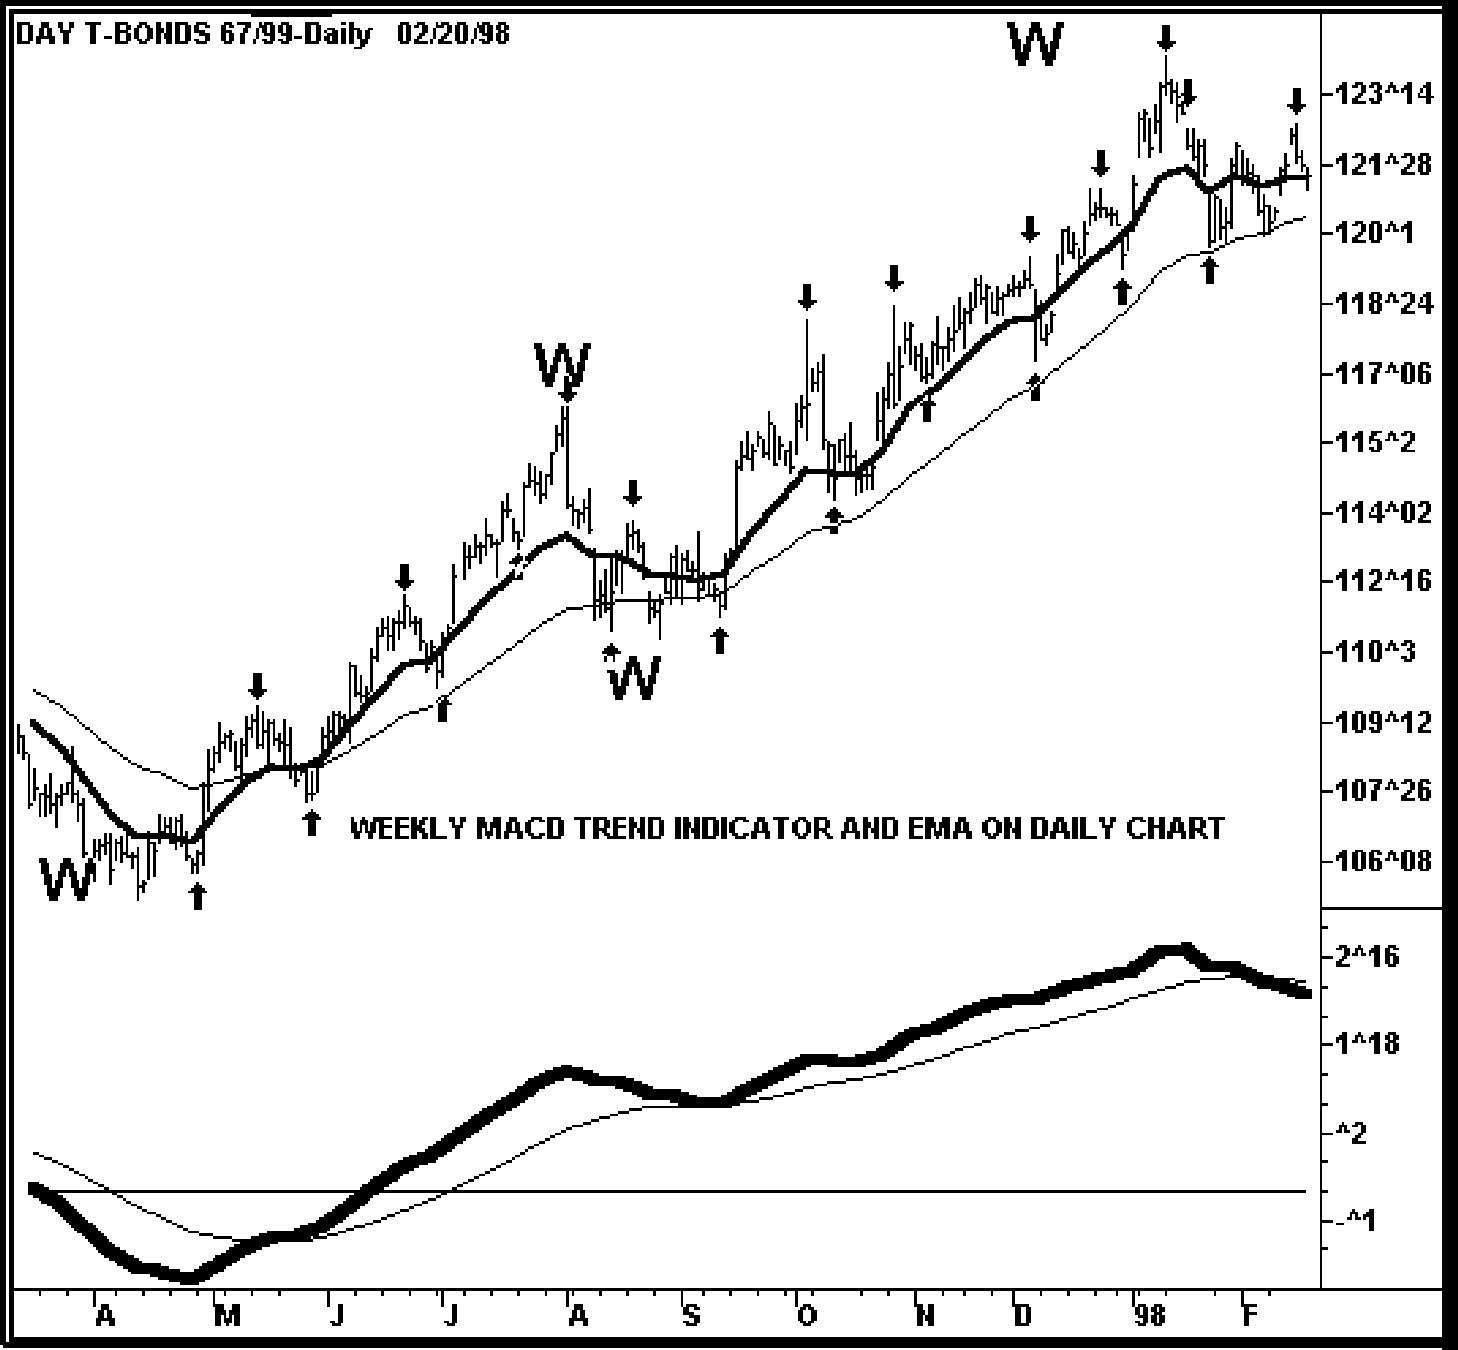 Trading Cycle Bottoms